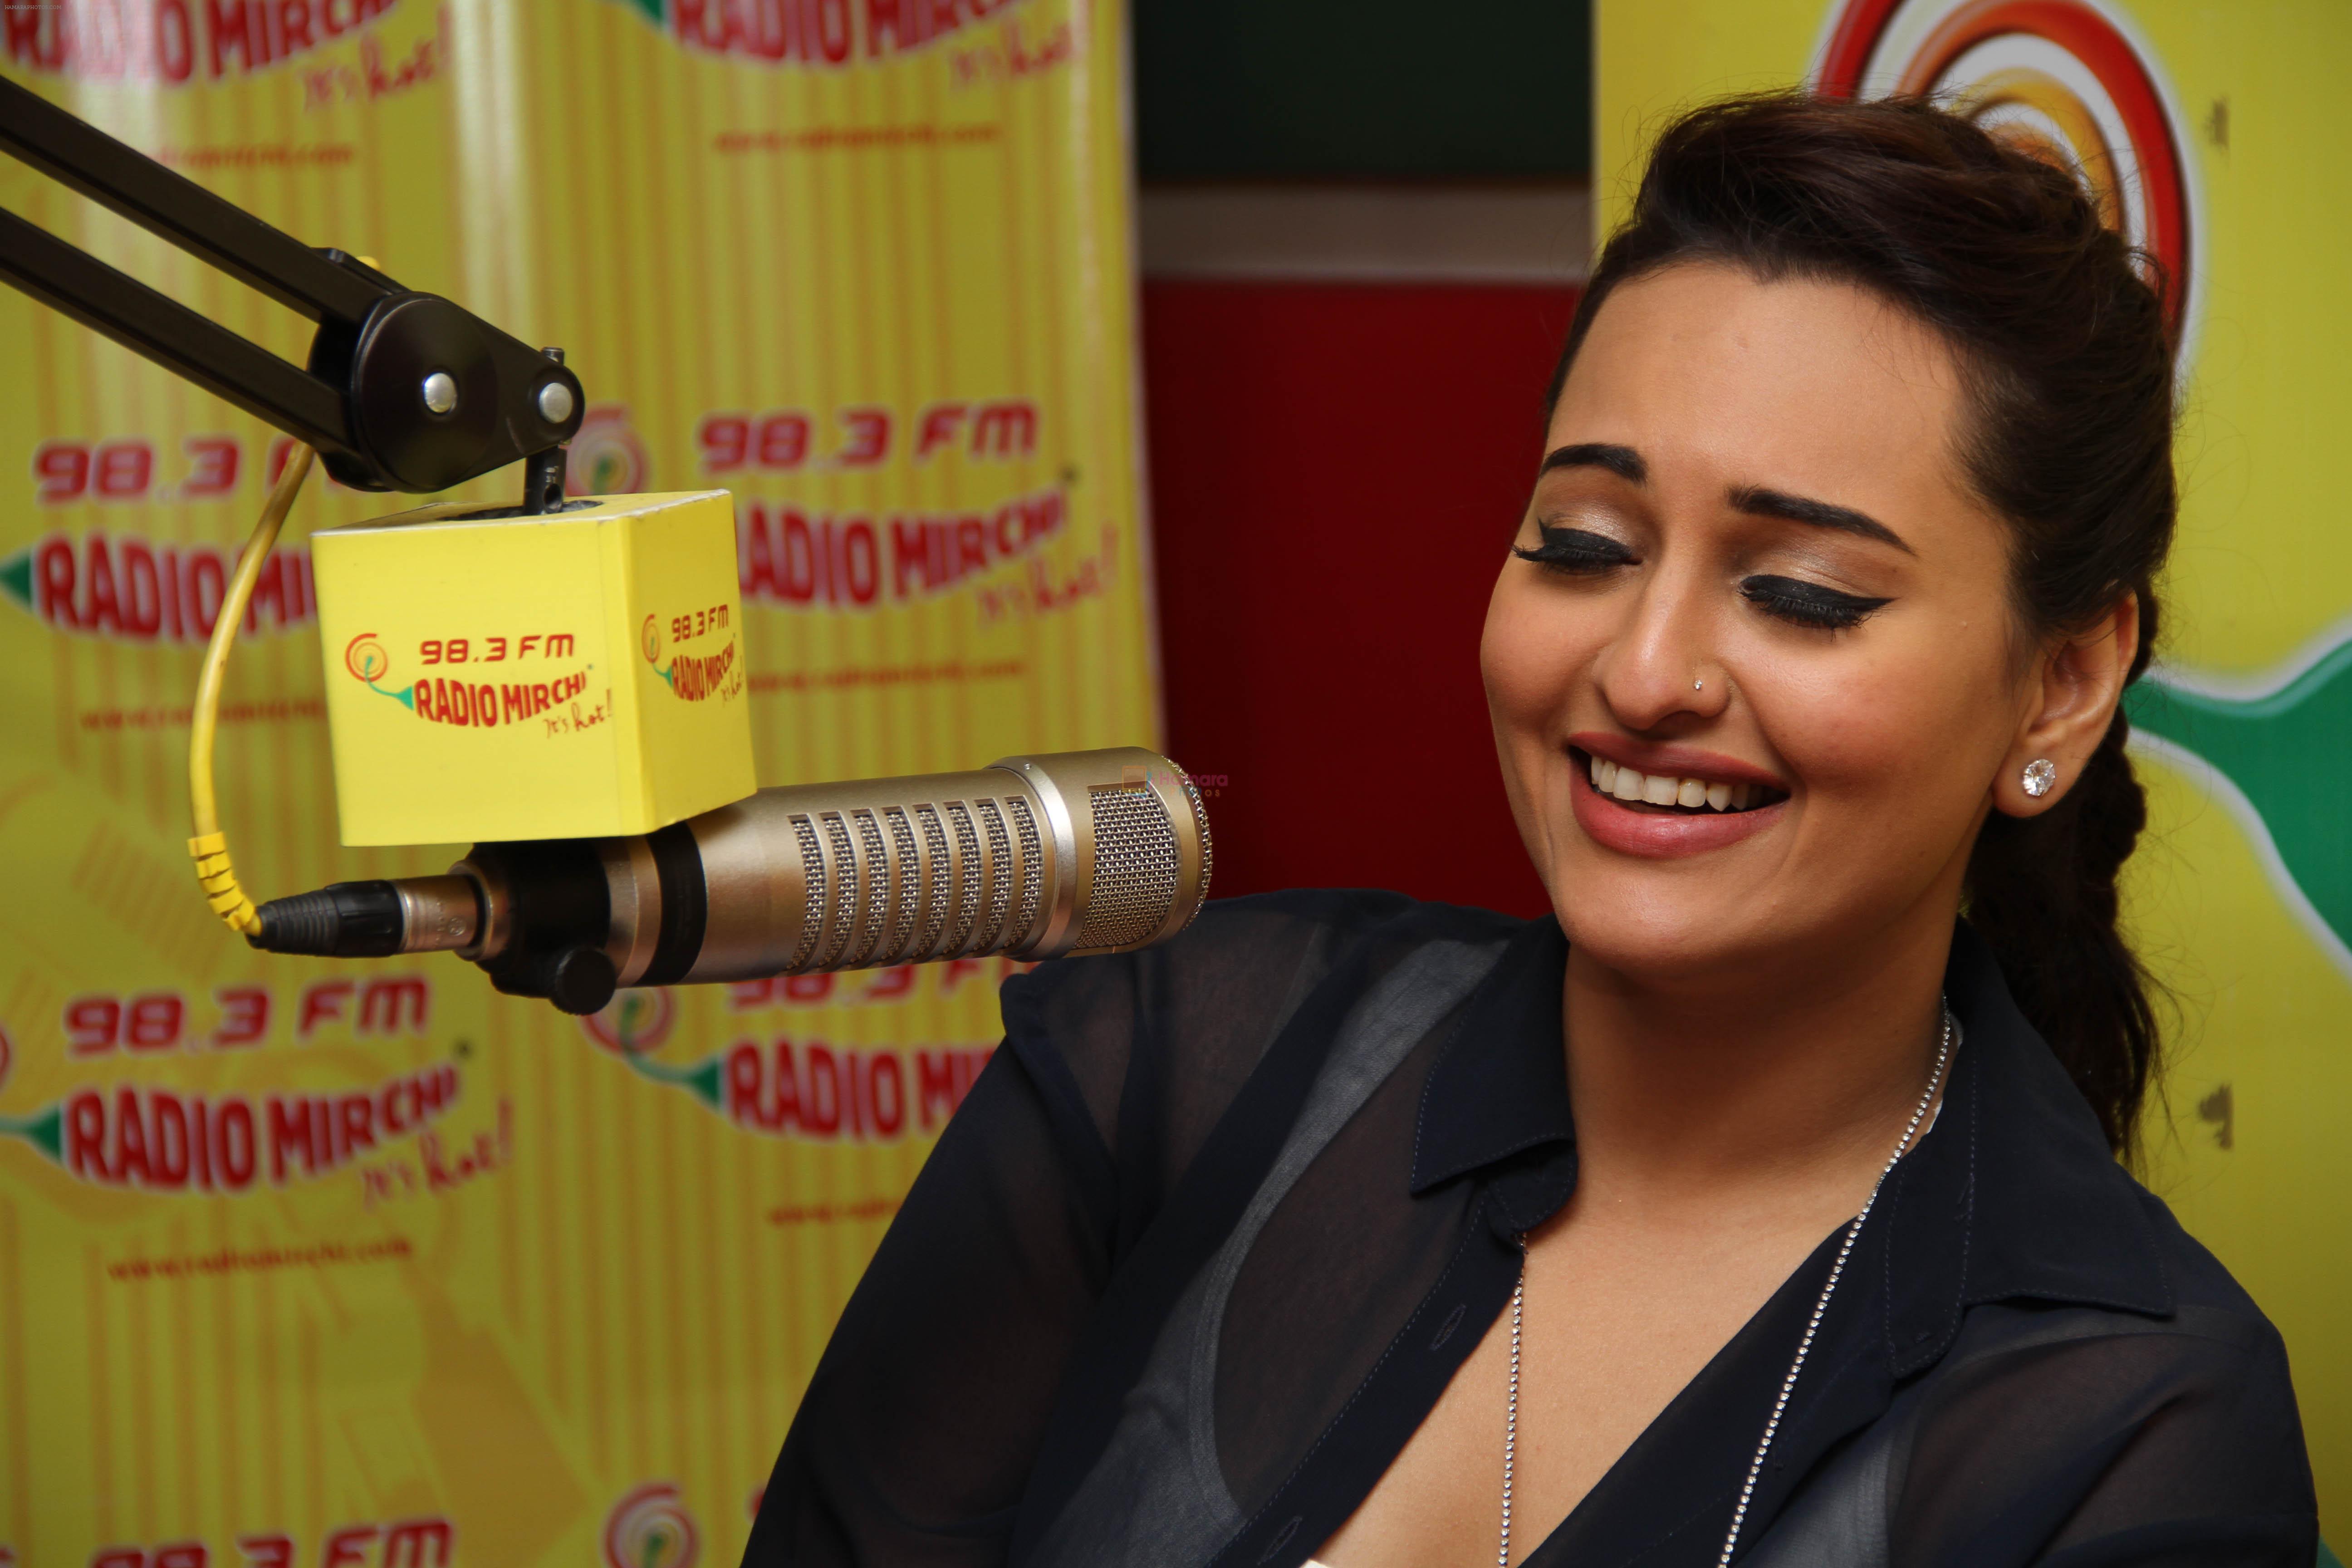 Sonakshi Sinha at Radio Mirchi Studio for promotion of her upcoming movie Lootera